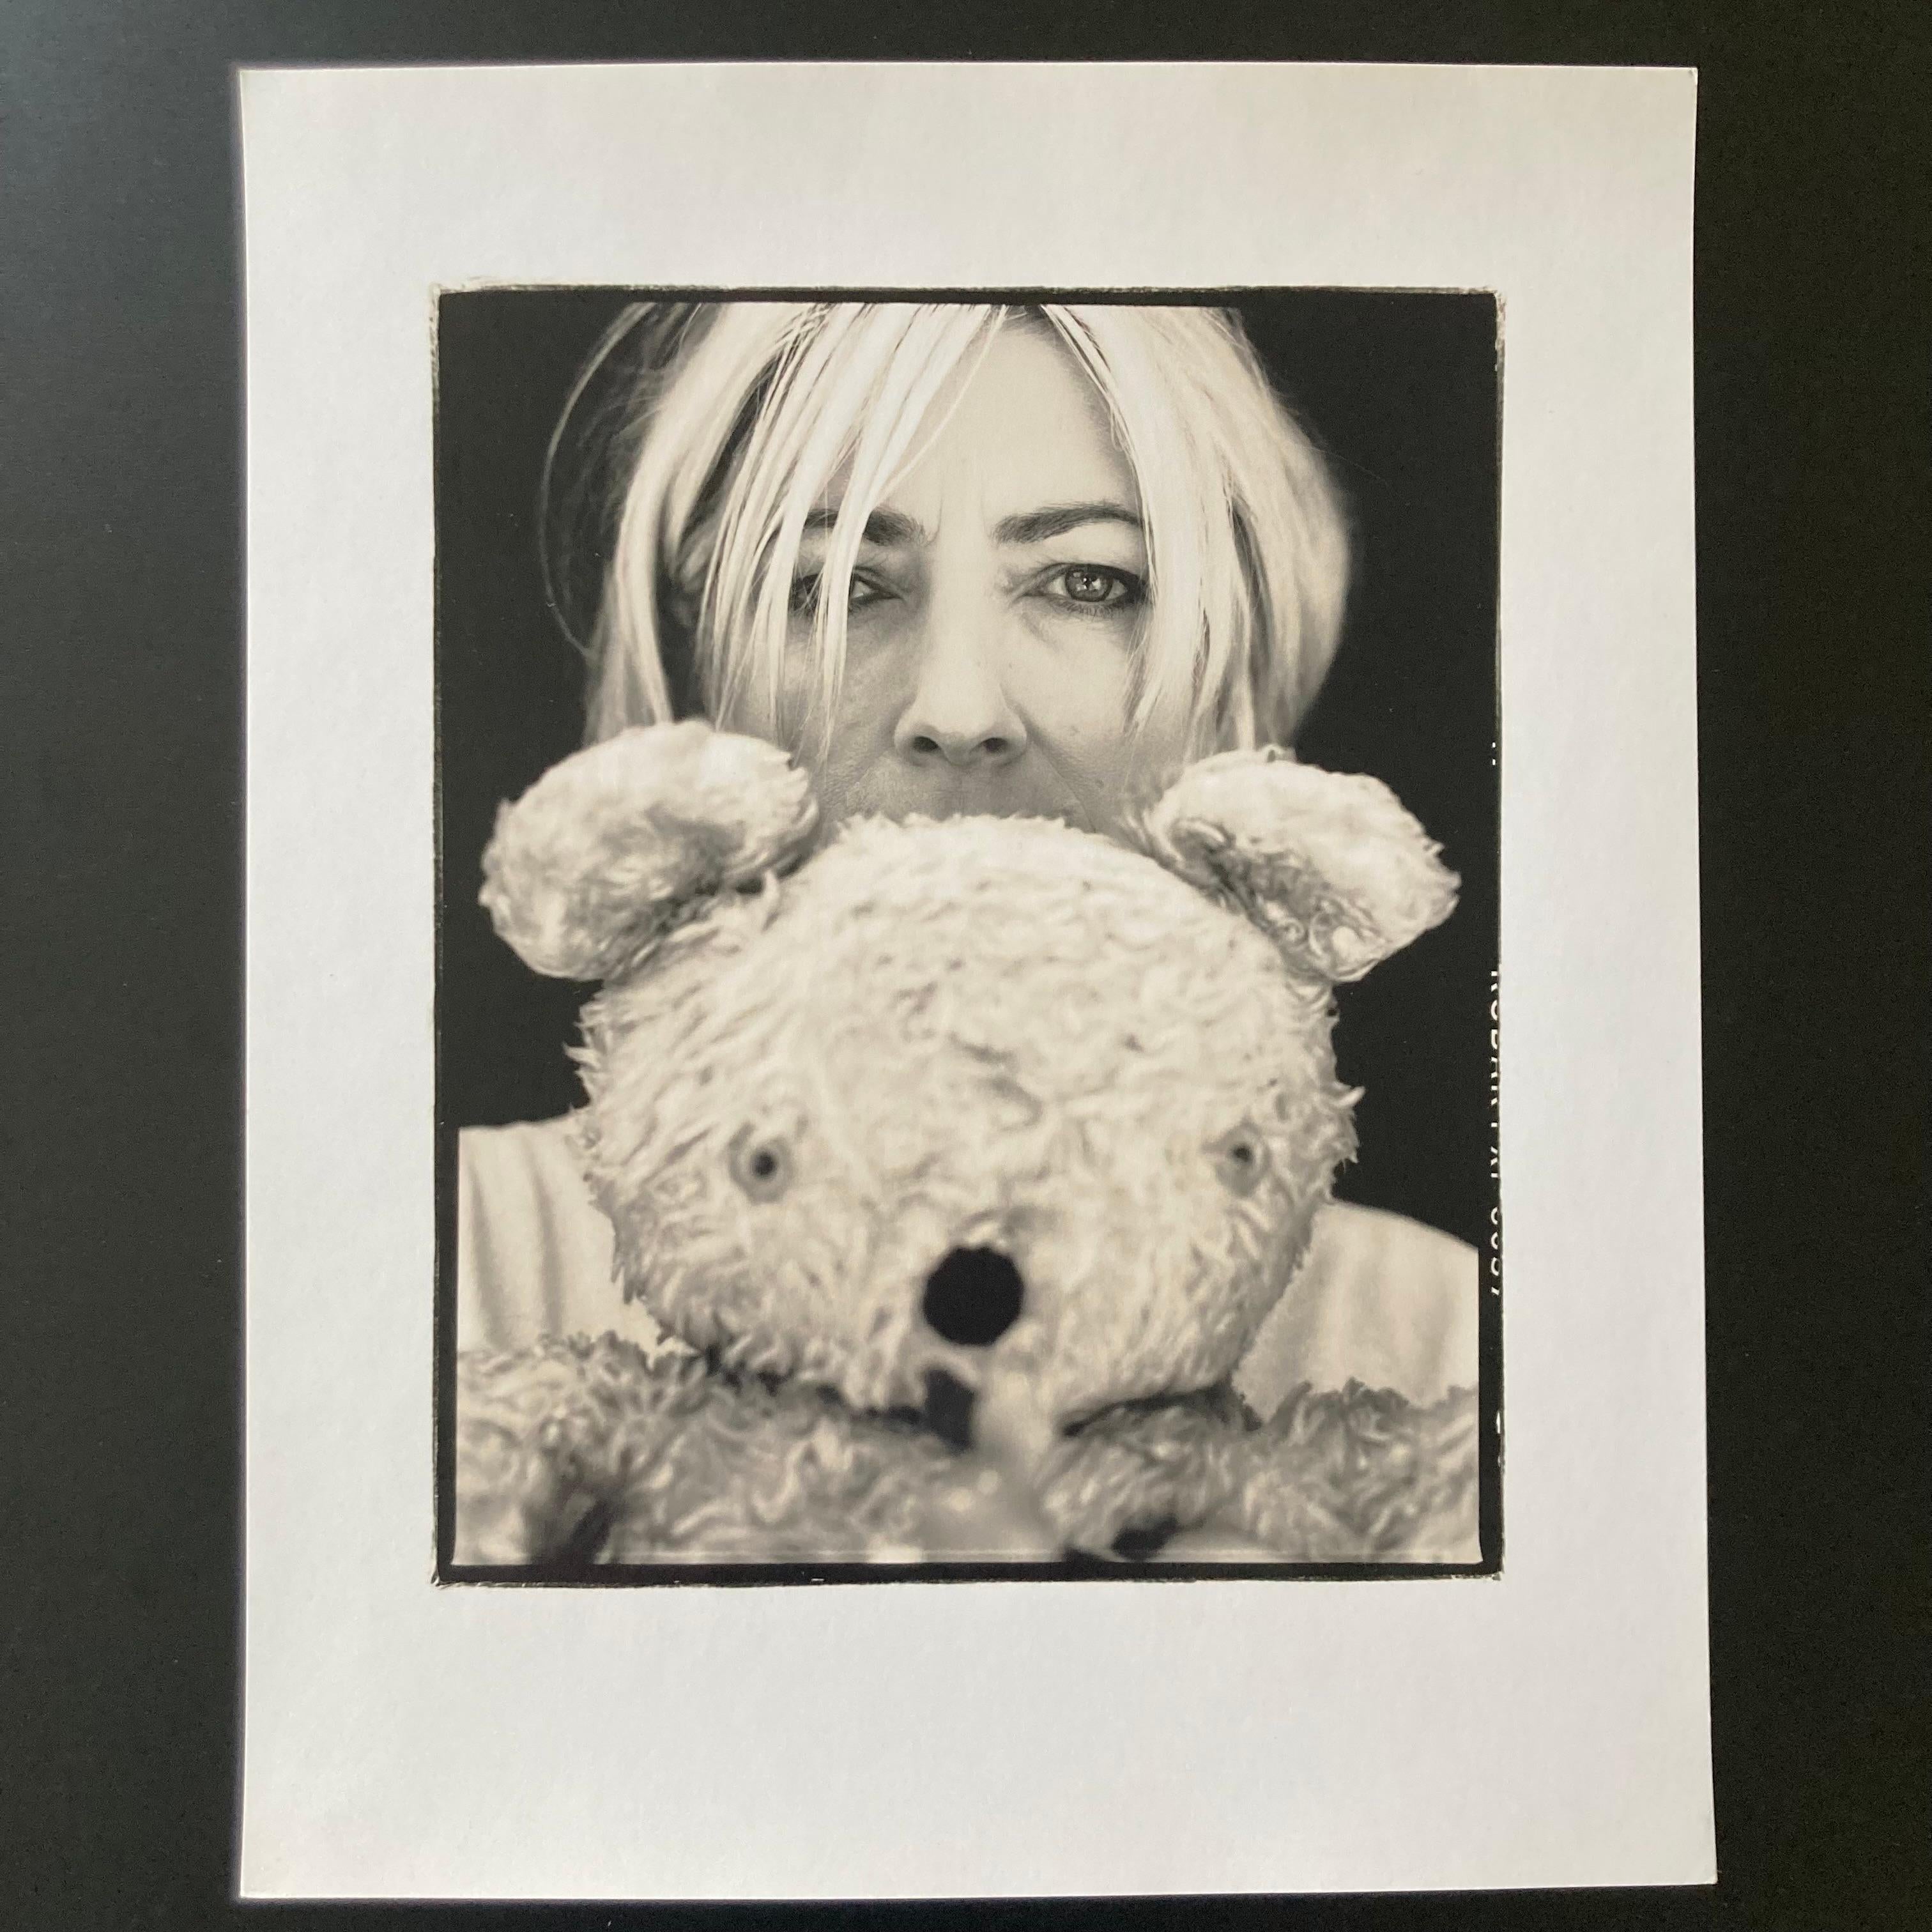 Kim Gordon of Sonic Youth, 8”x10” Hand-printed darkroom print, made at the time of the shoot in 1994, and stored flat in a temperature-controlled environment.

The print is in perfect new condition with no flaws. Hand-signed on the back in pencil by